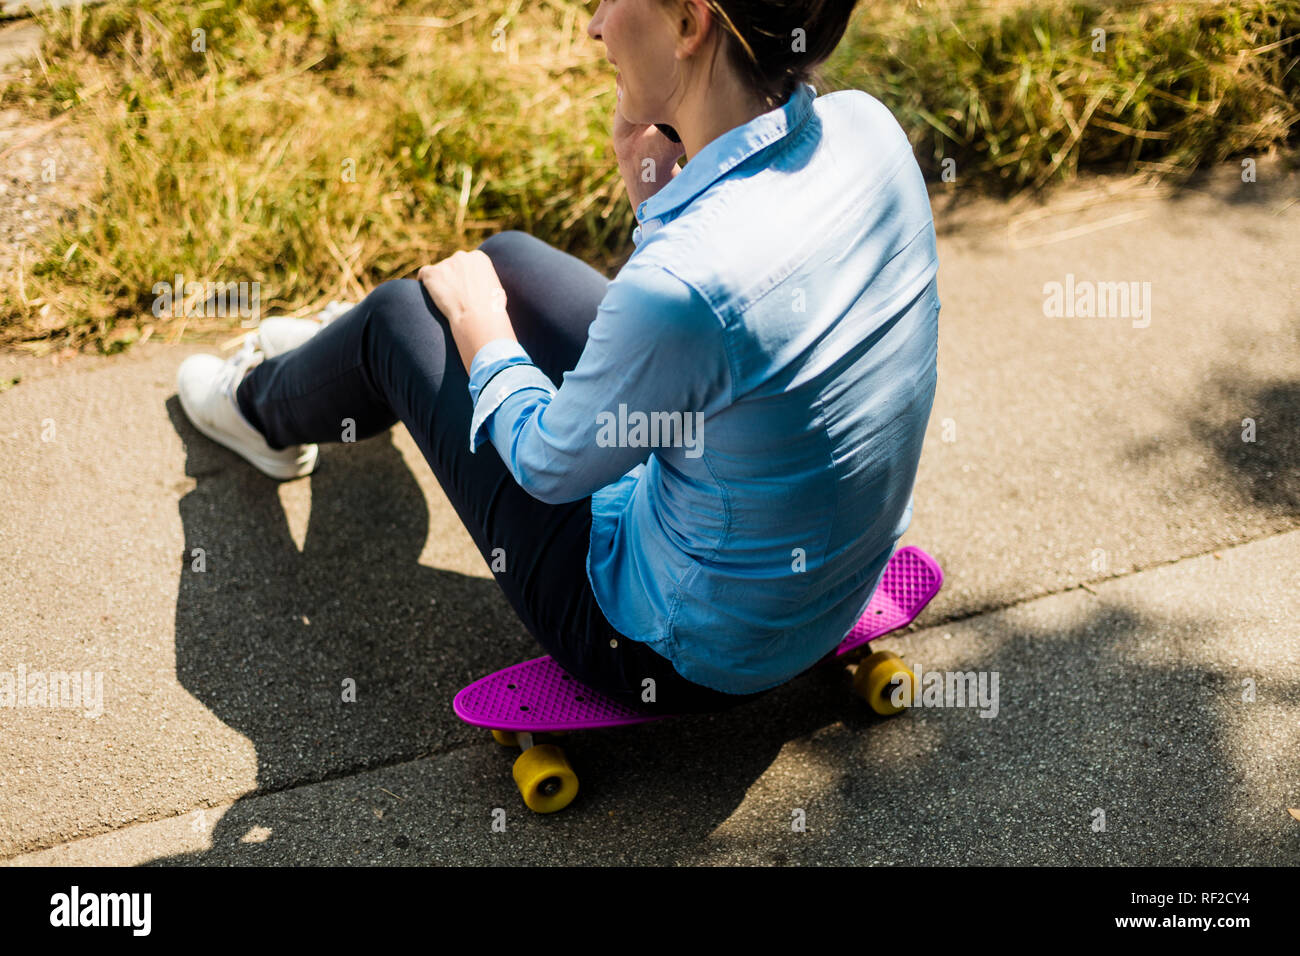 Woman sitting on penny board talking on cell phone Stock Photo